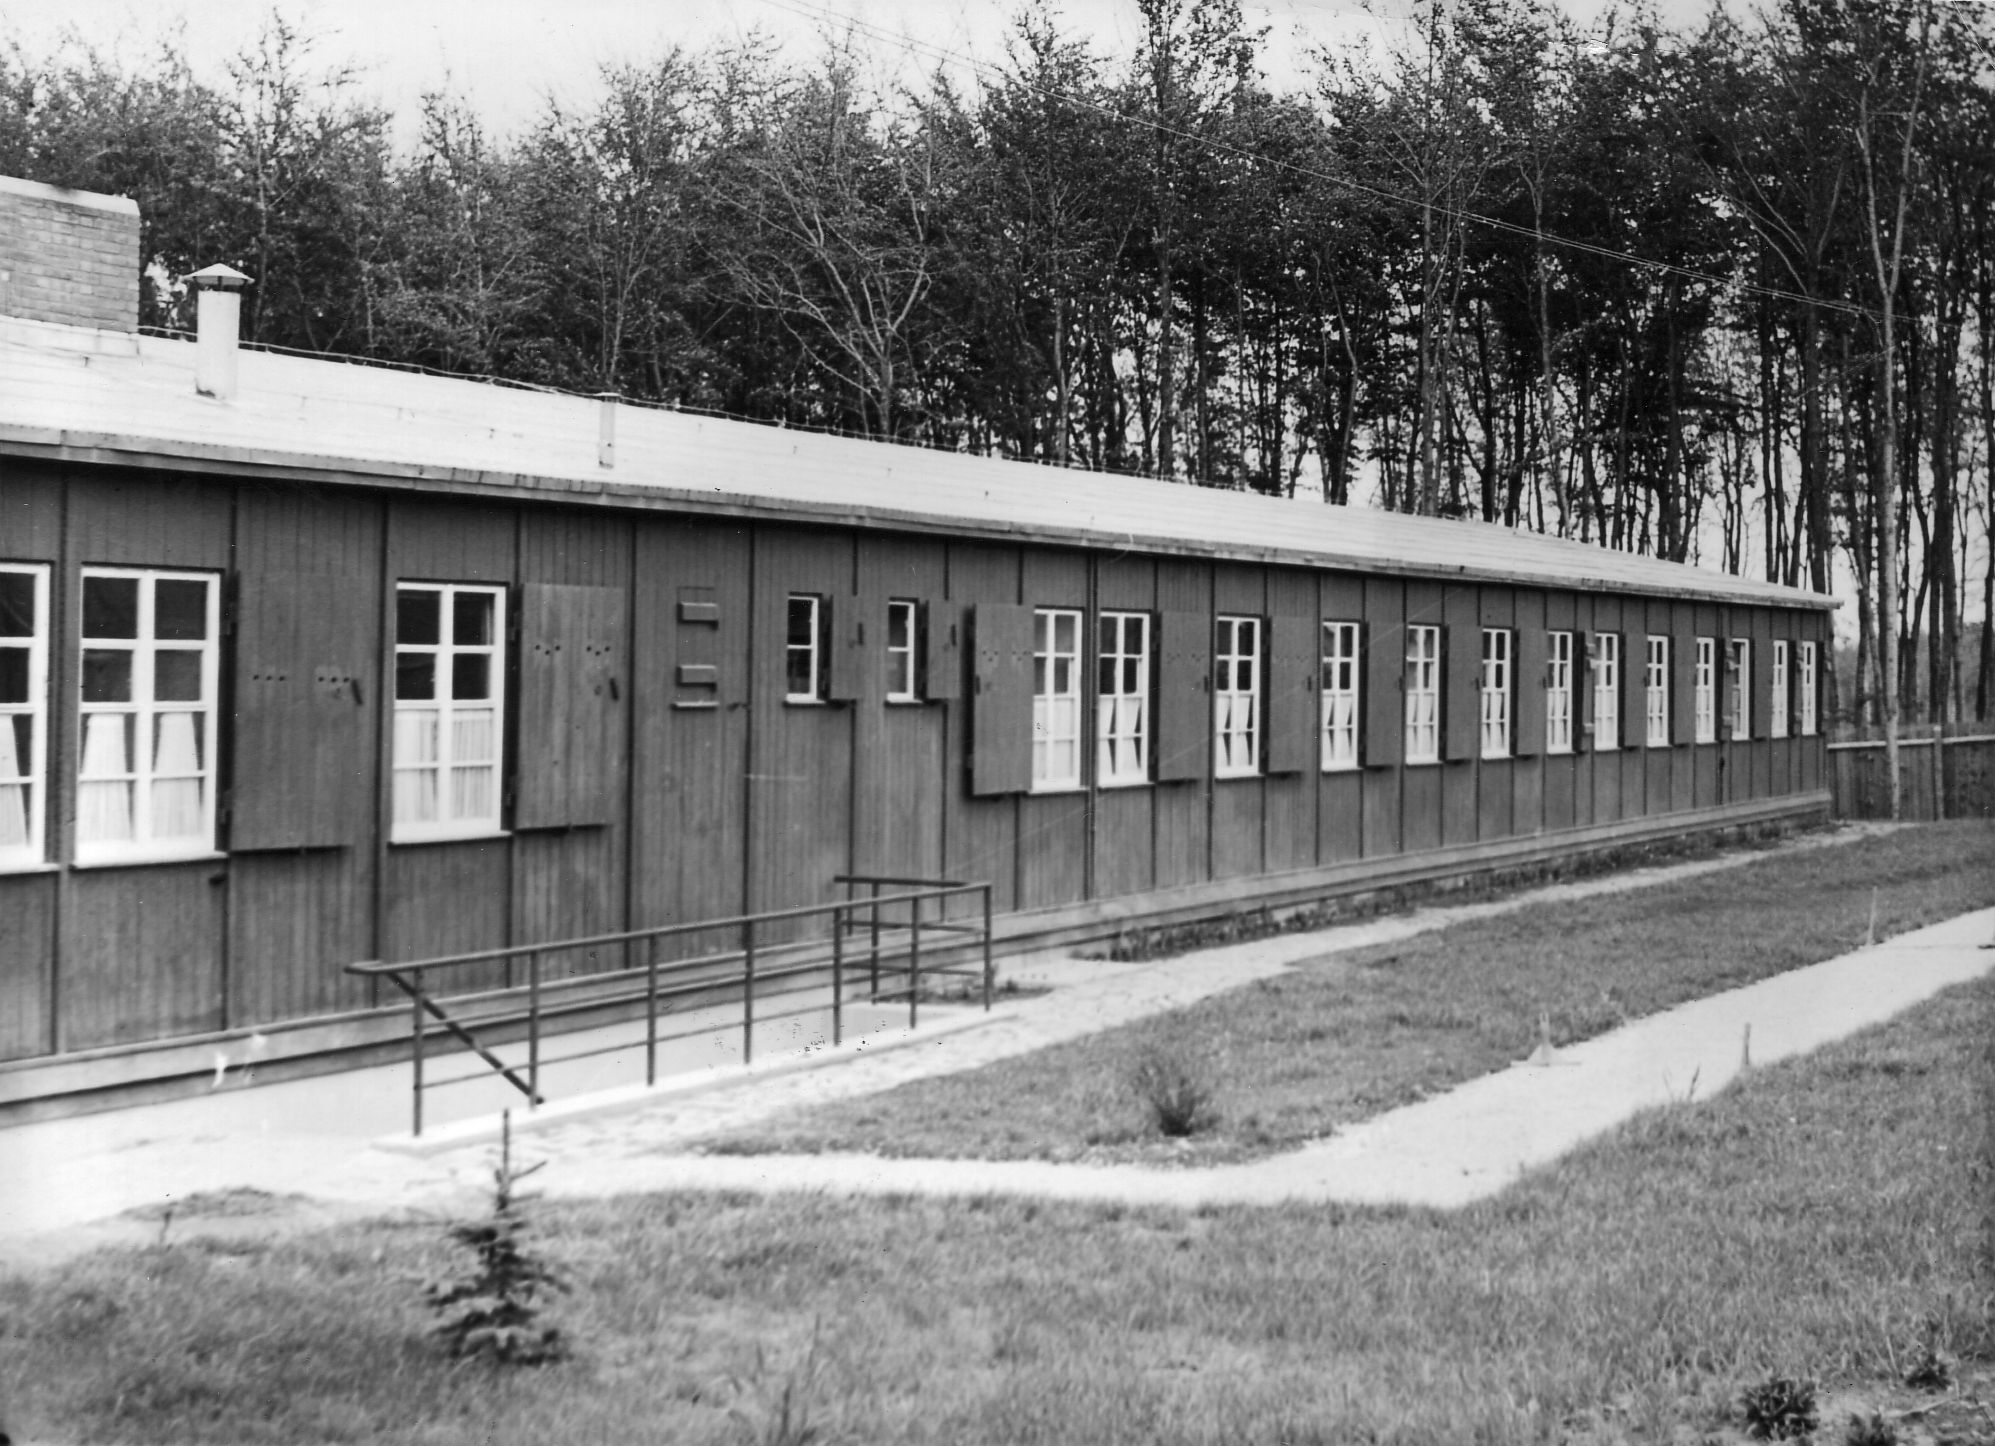 This side view of the bordello building at the Buchenwald concentration camp reveals curtains in each window. This photo was taken at the camp in 1943. 